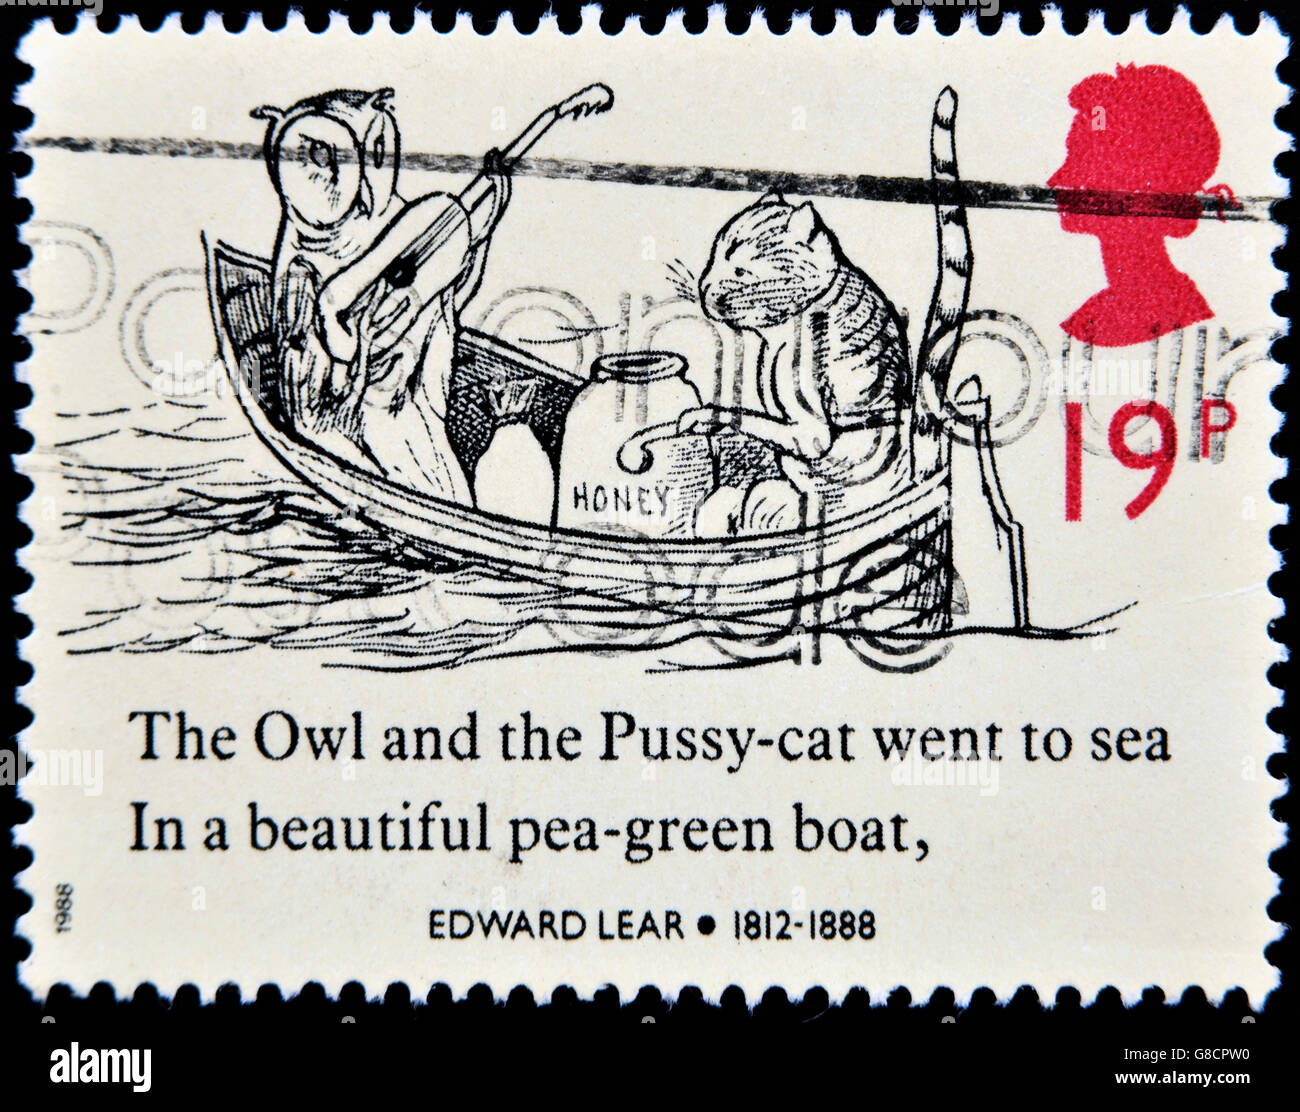 UNITED KINGDOM - CIRCA 1988: a stamp printed in the Great Britain shows The Owl and the Pussycat in a Boat, Drawing by Edward Le Stock Photo